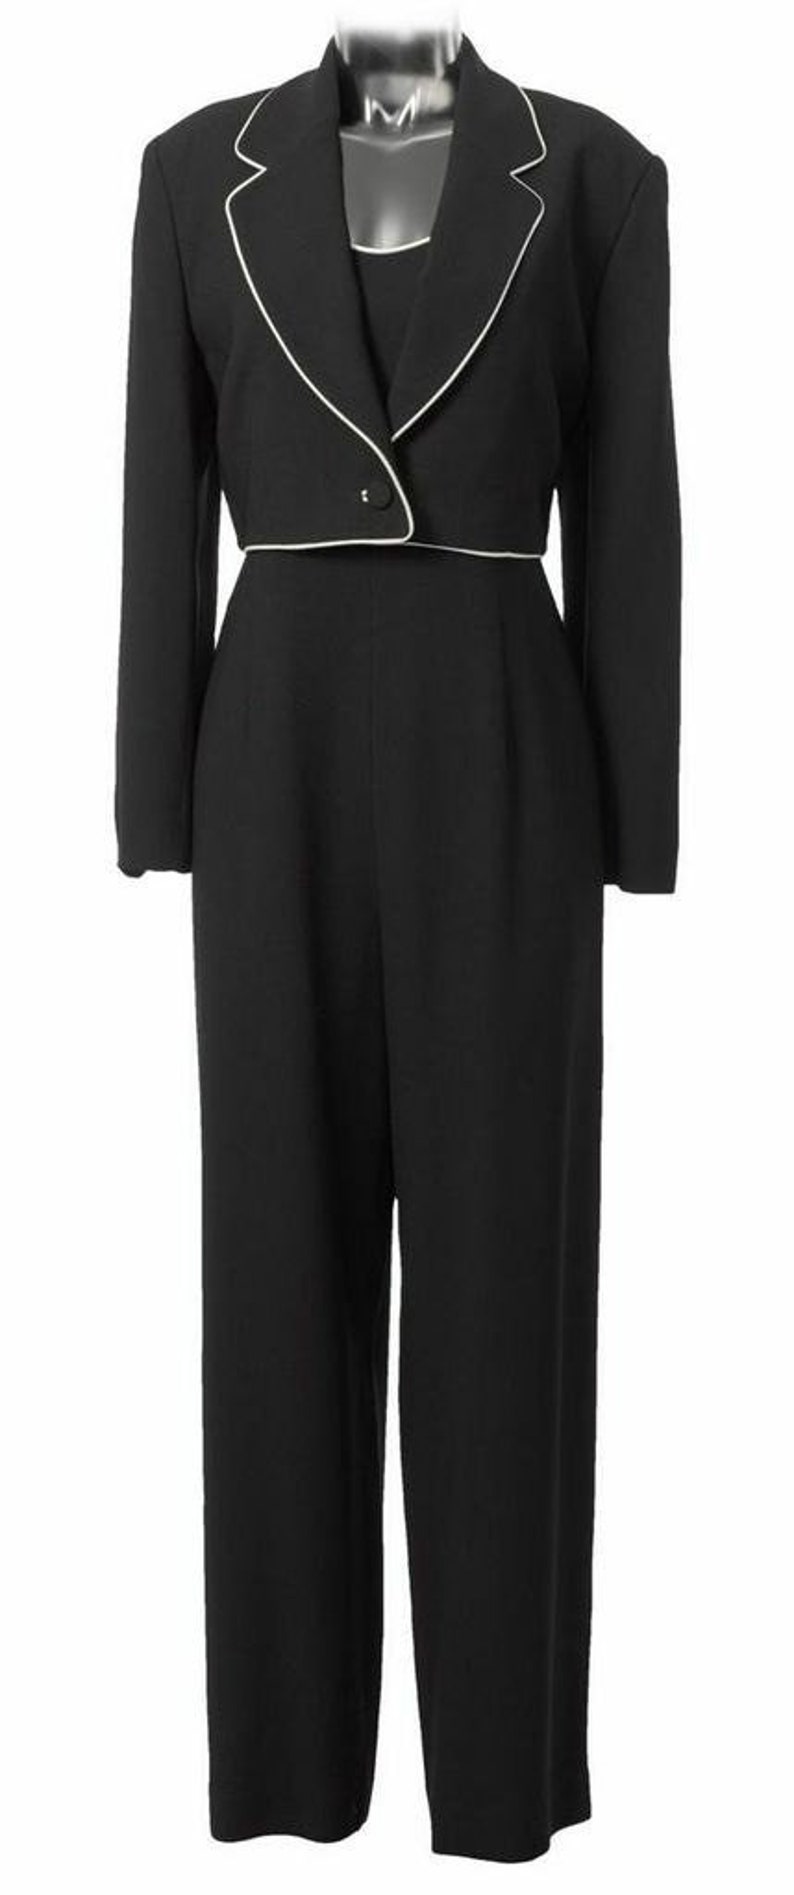 Black Jumpsuit with White Piping And Cropped Jacket. image 1